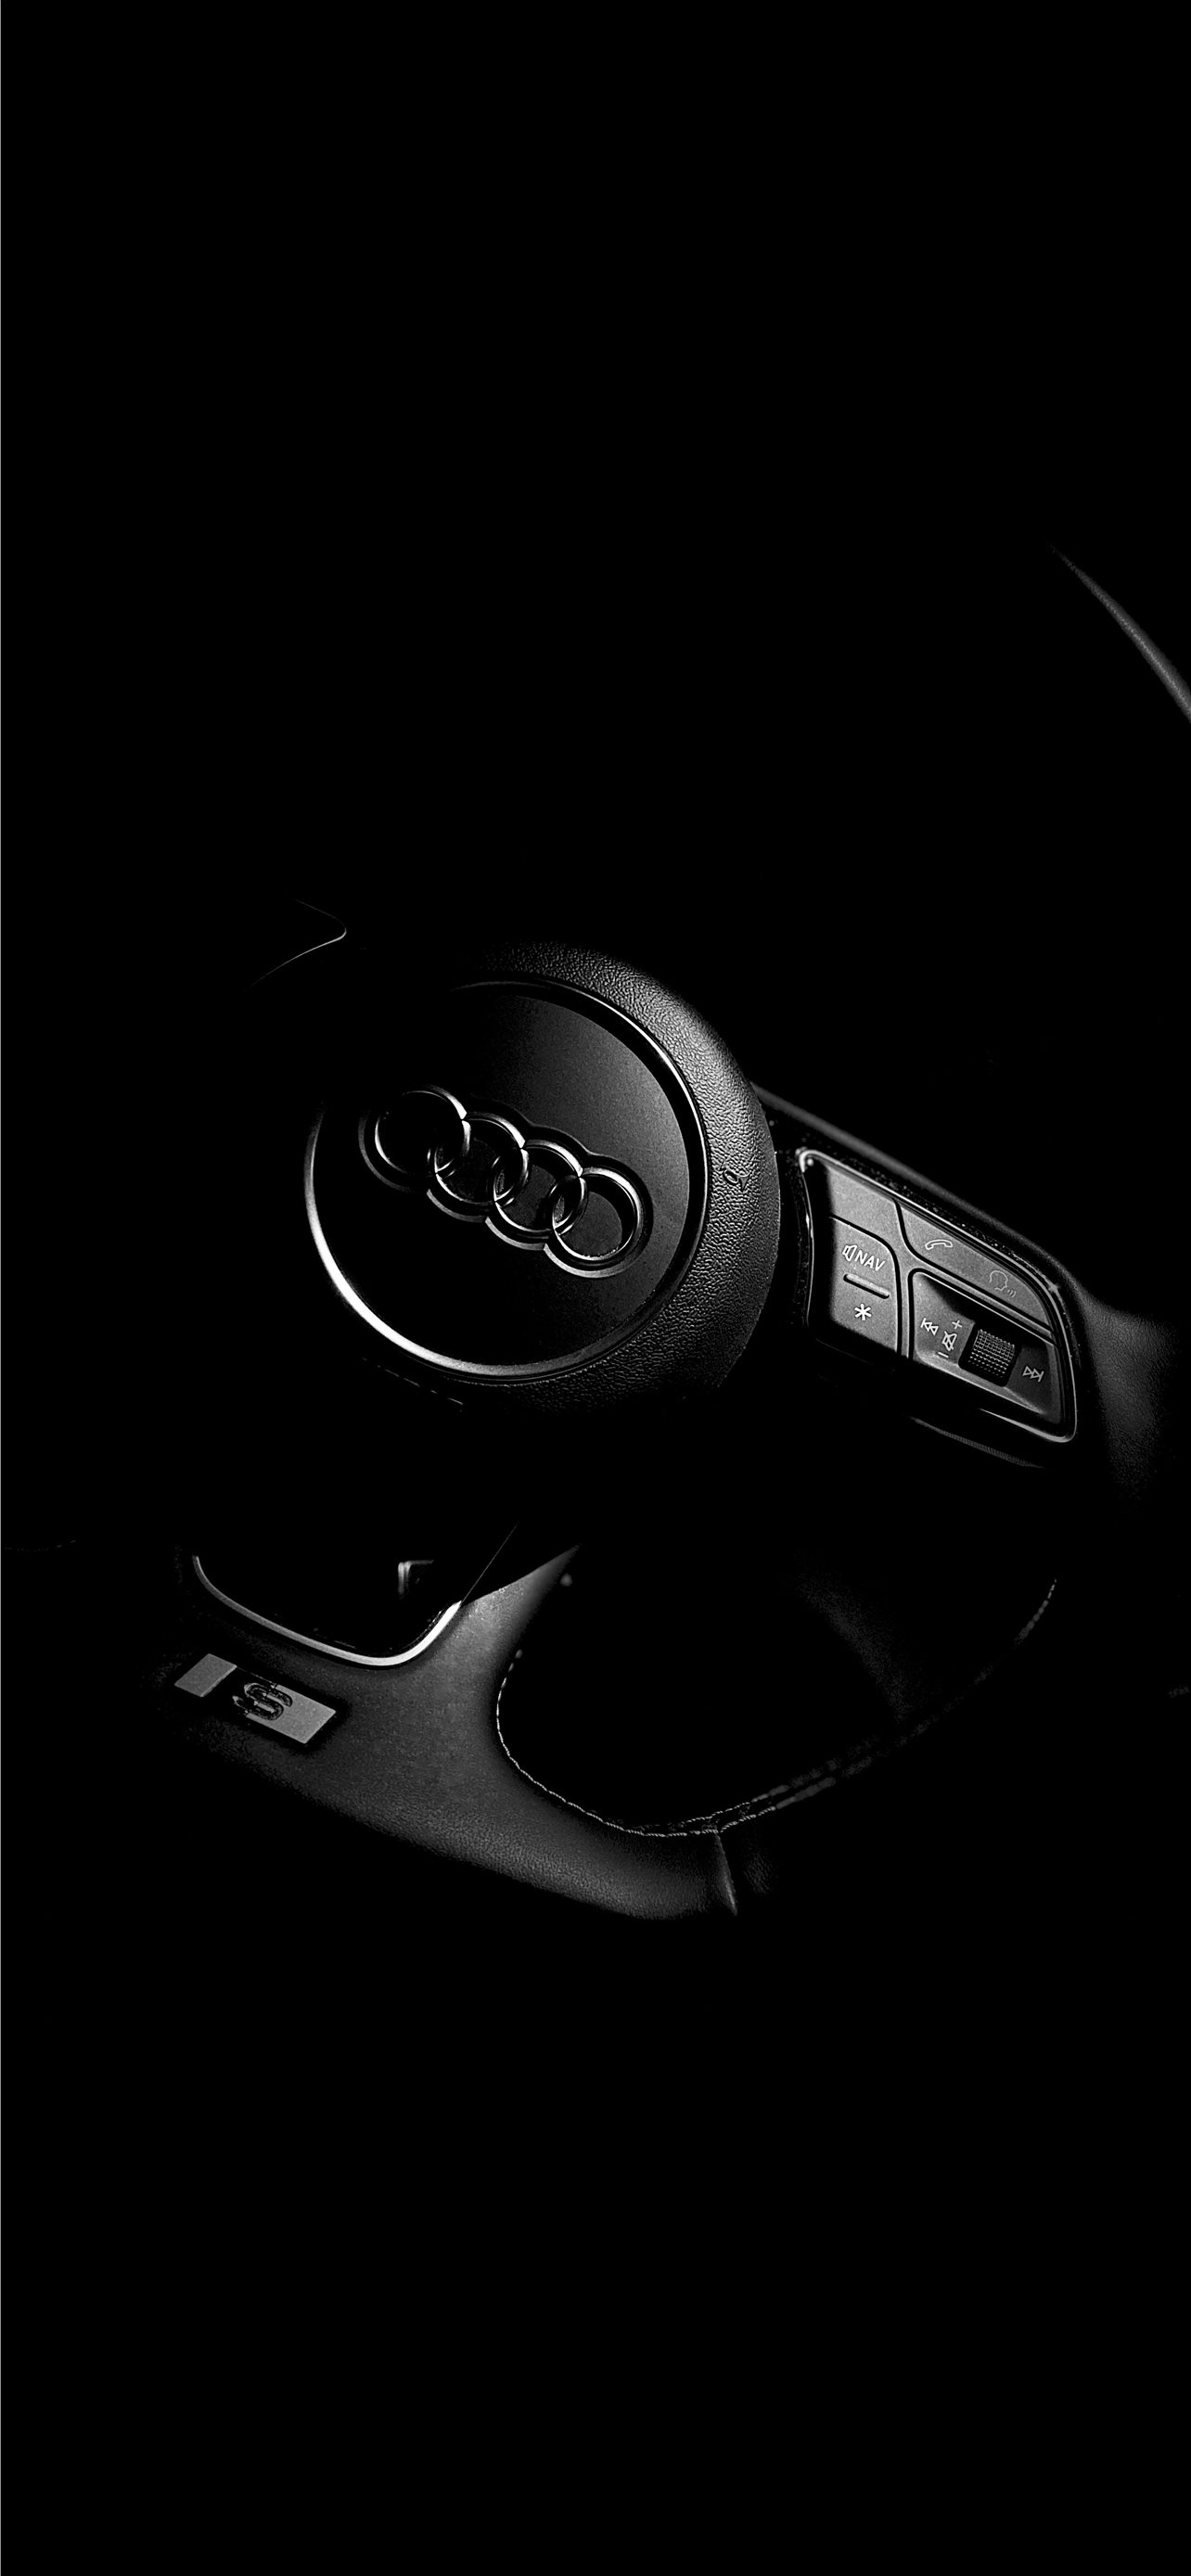 Audi A3 Iphone Wallpapers Free Download